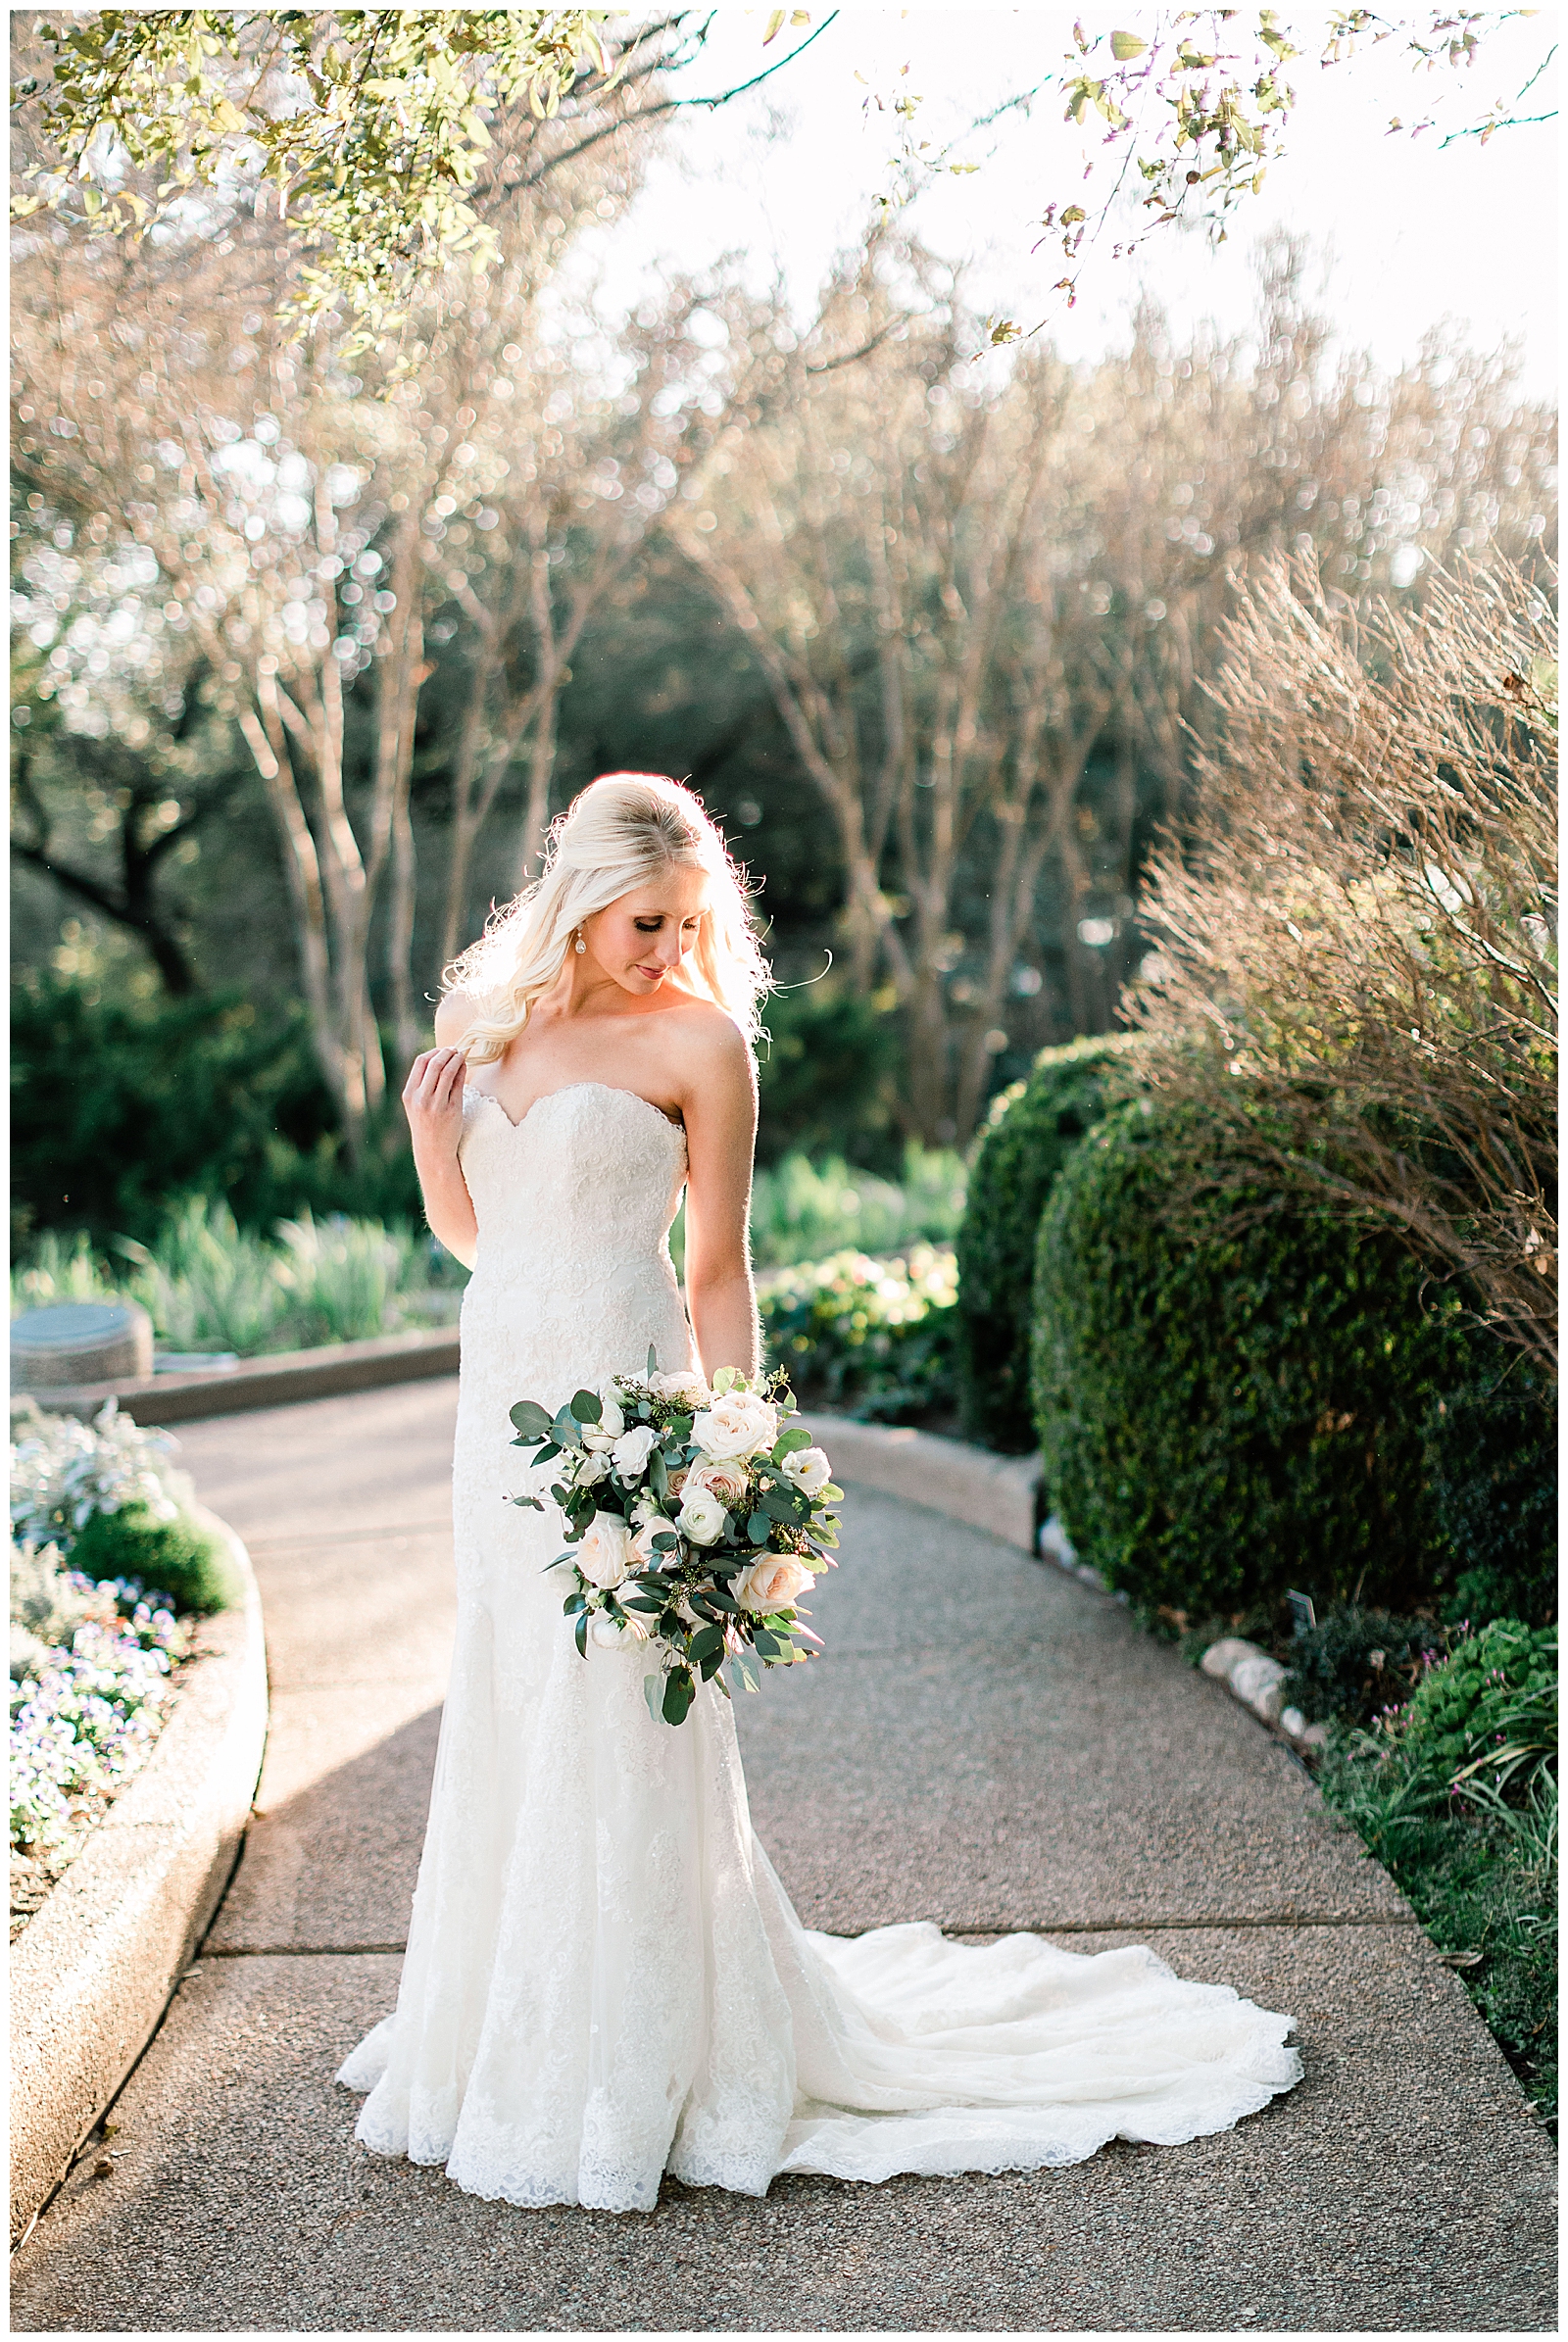 Brittany S Bridal Portraits At The Fort Worth Botanical Gardens